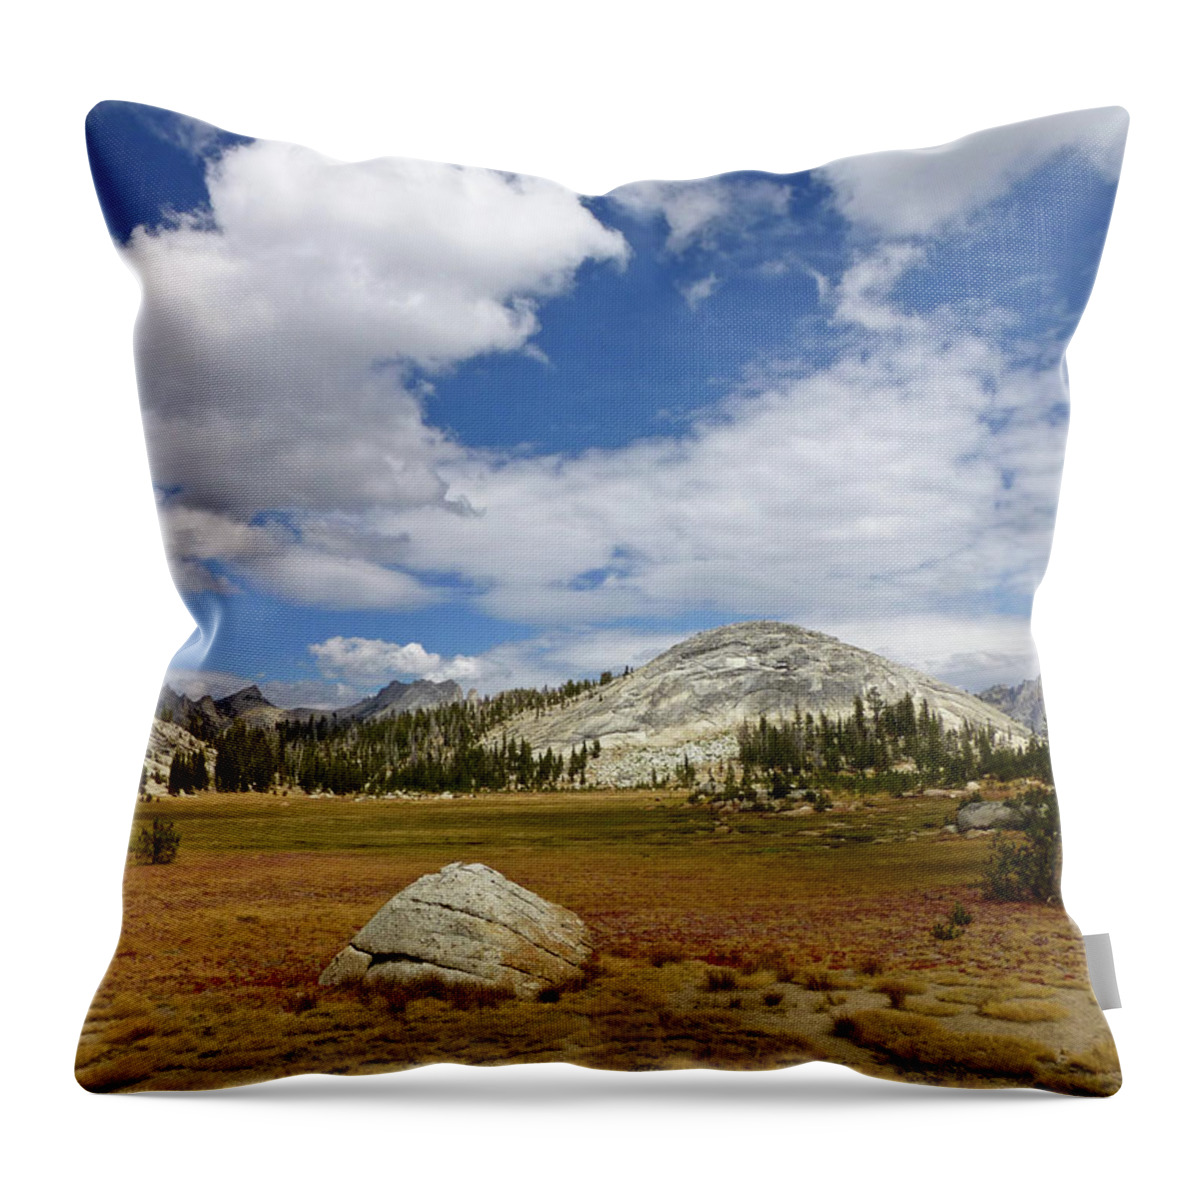 Yosemite National Park Throw Pillow featuring the photograph John Muir Trail High Sierra Camp Meadow by Amelia Racca